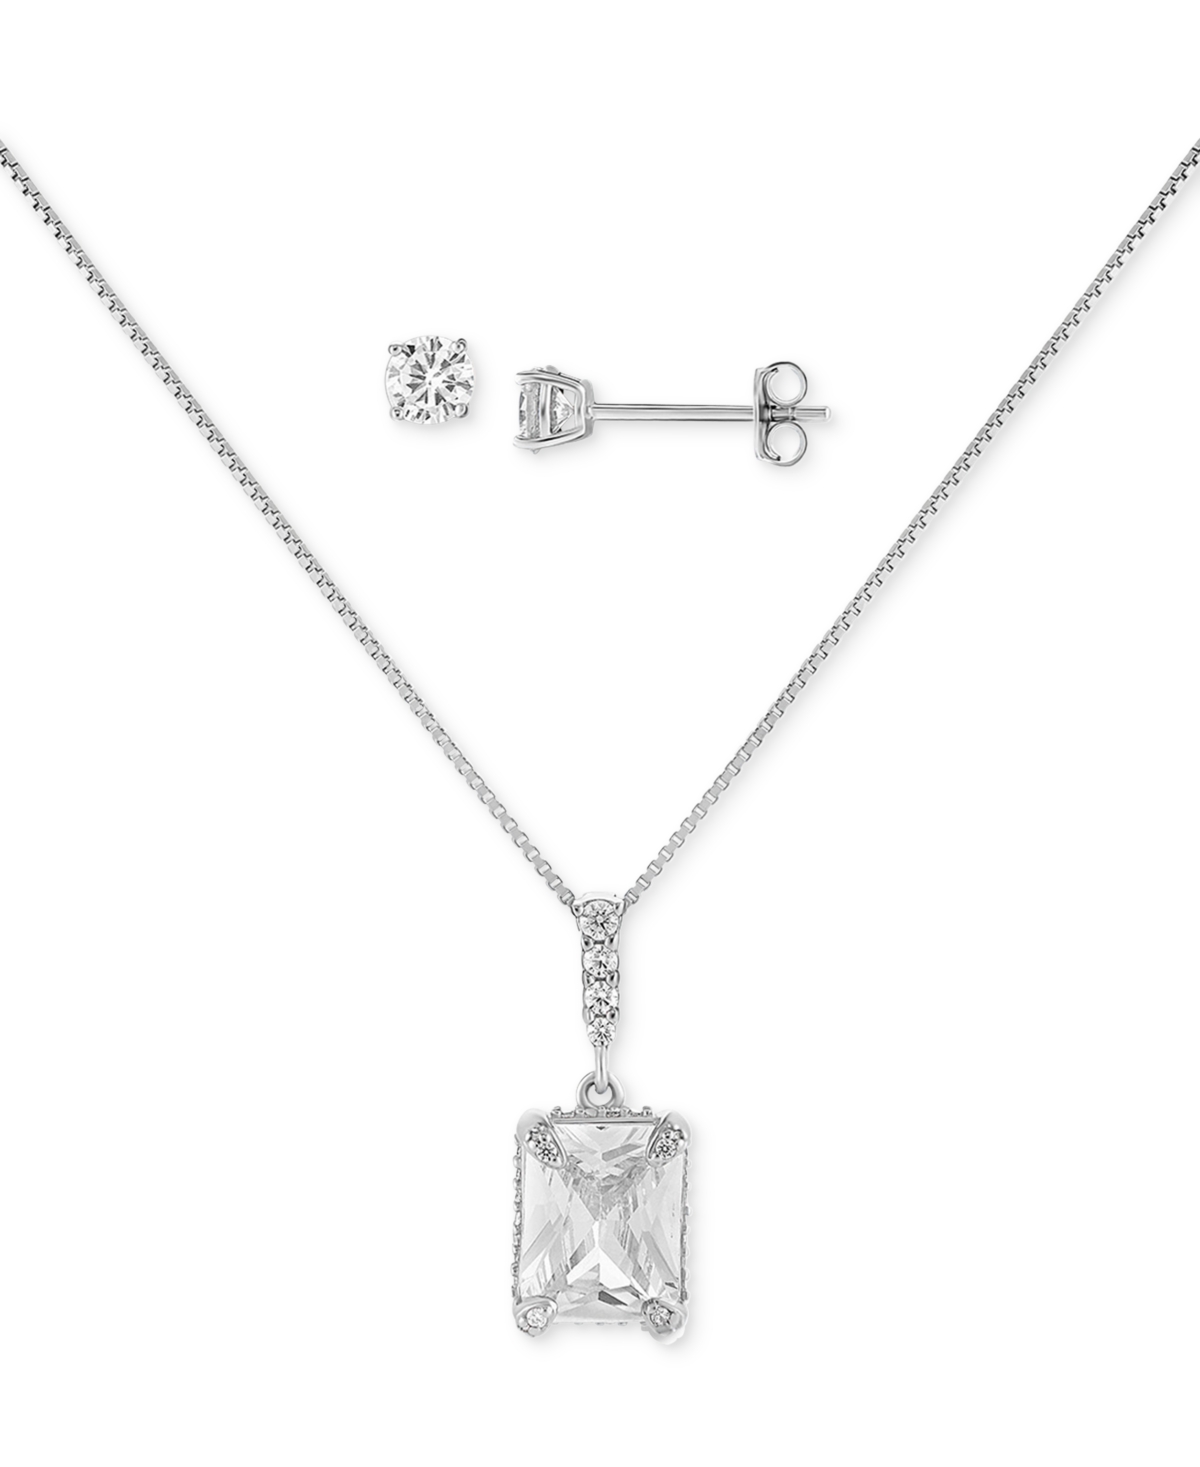 2-Pc. Set Cubic Zirconia Emerald-Cut Pendant Necklace & Complementing Stud Earrings in Sterling Silver, Created for Macy's - Sterling Si